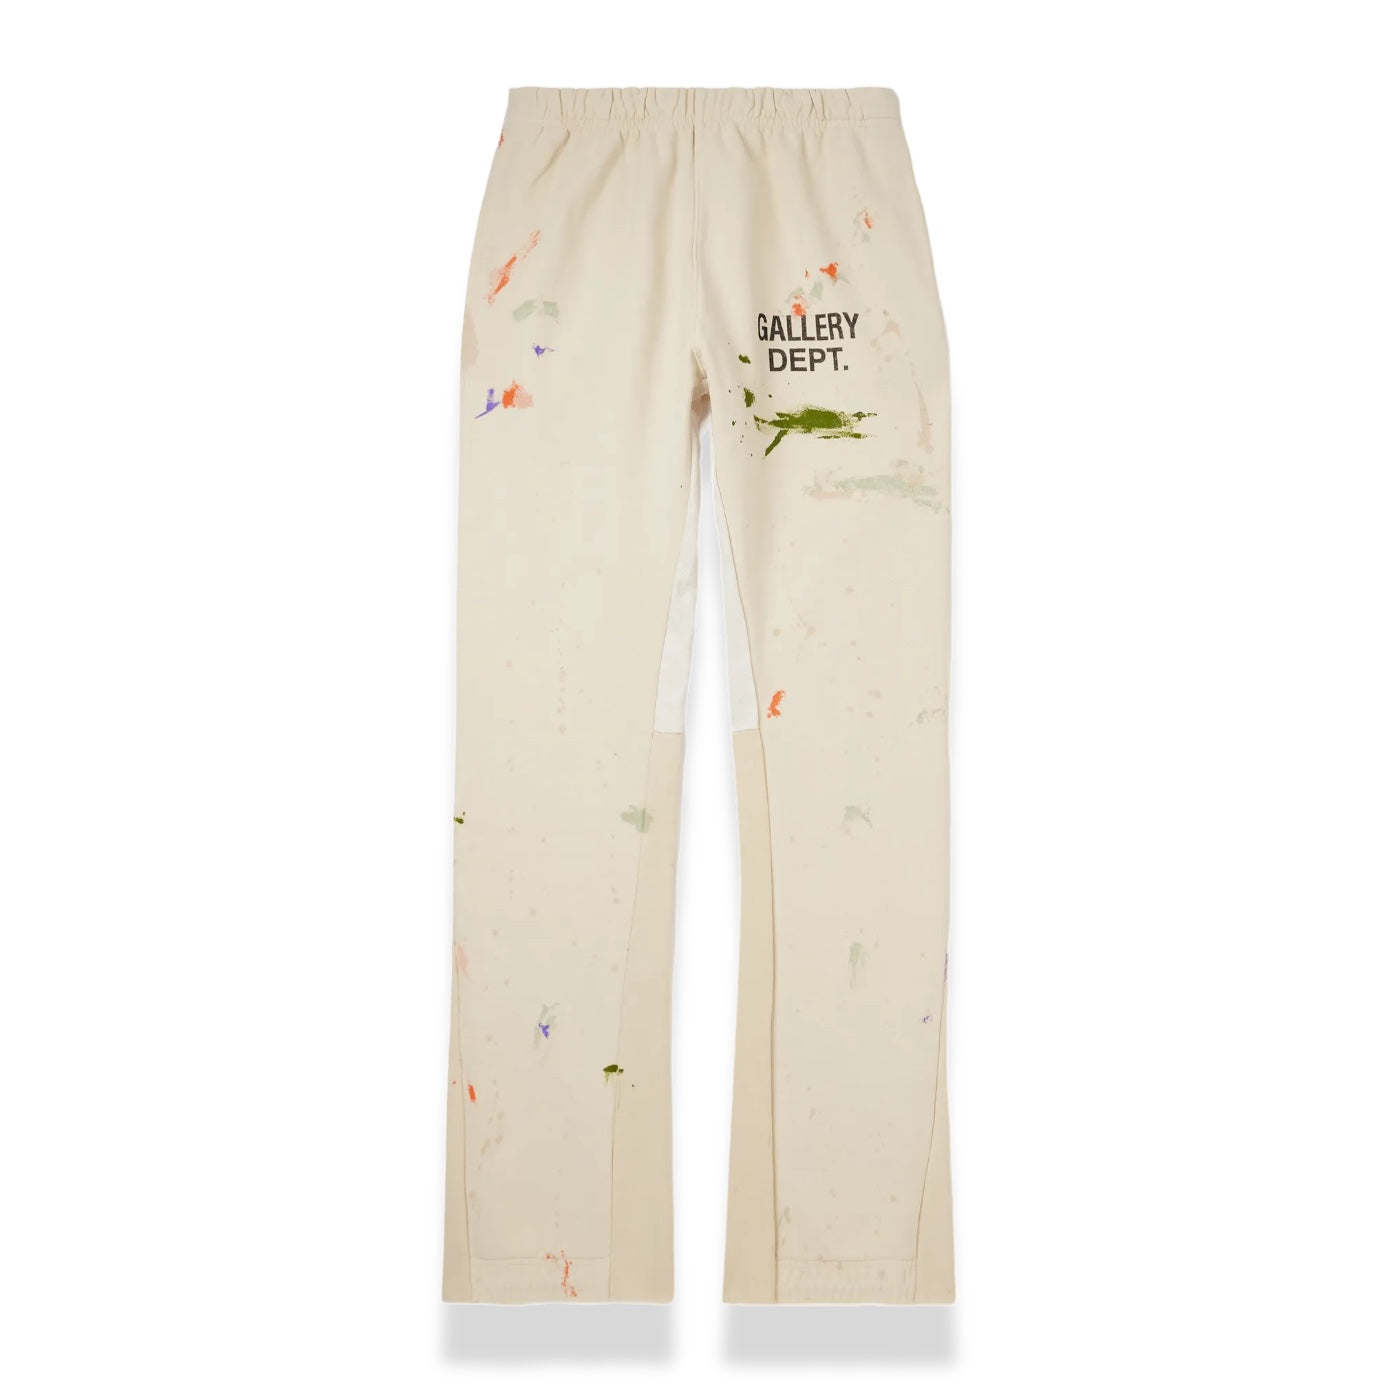 Gallery Dept. - Paint Flared Pants